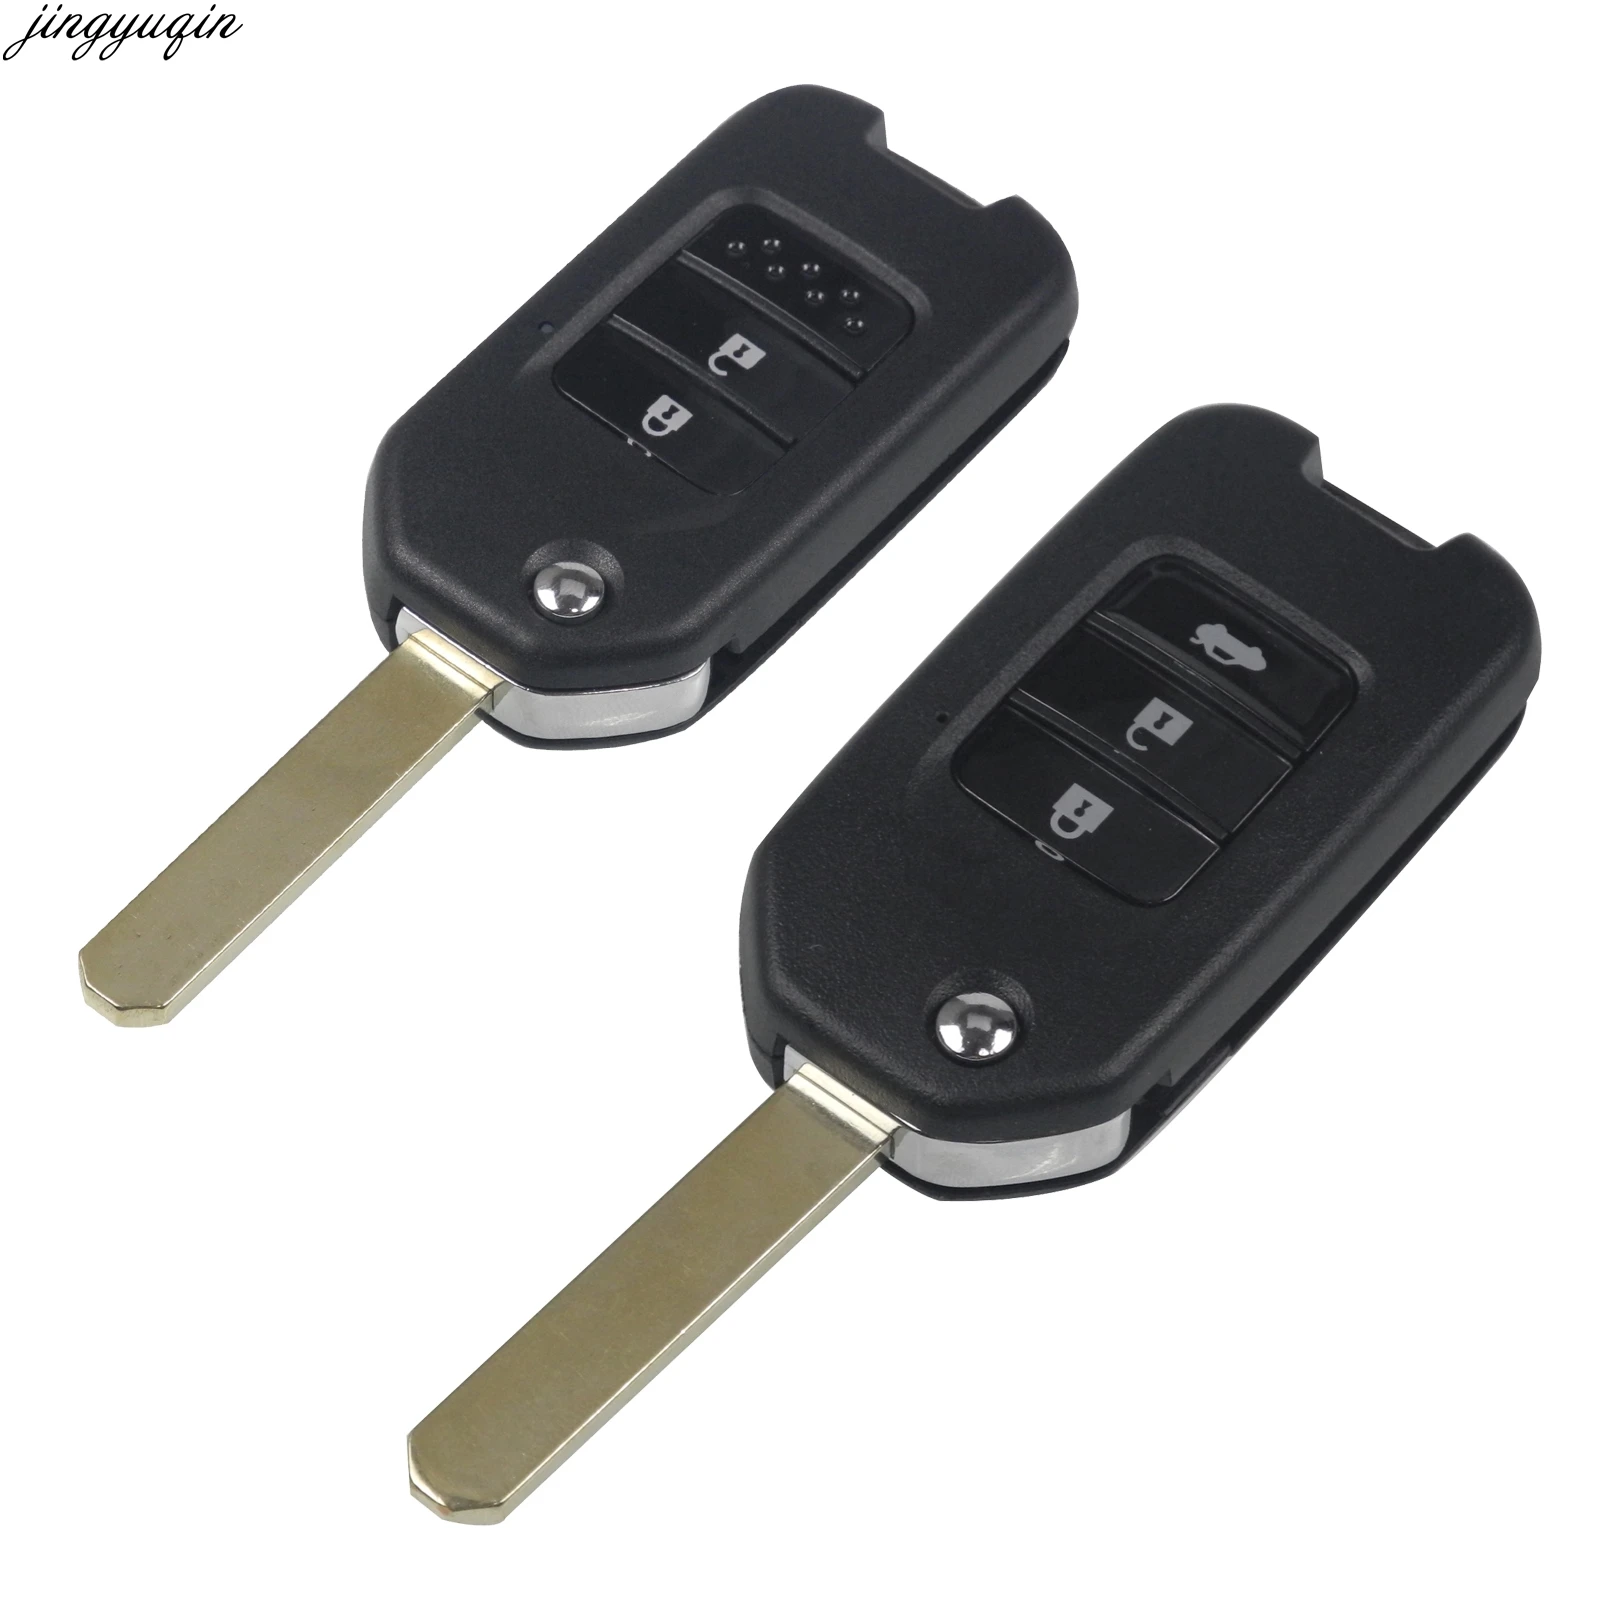 qualitykeylessplus Two Emergency Insert Blade Replacements for Acura Remote Uncut Key with Free KEYTAG